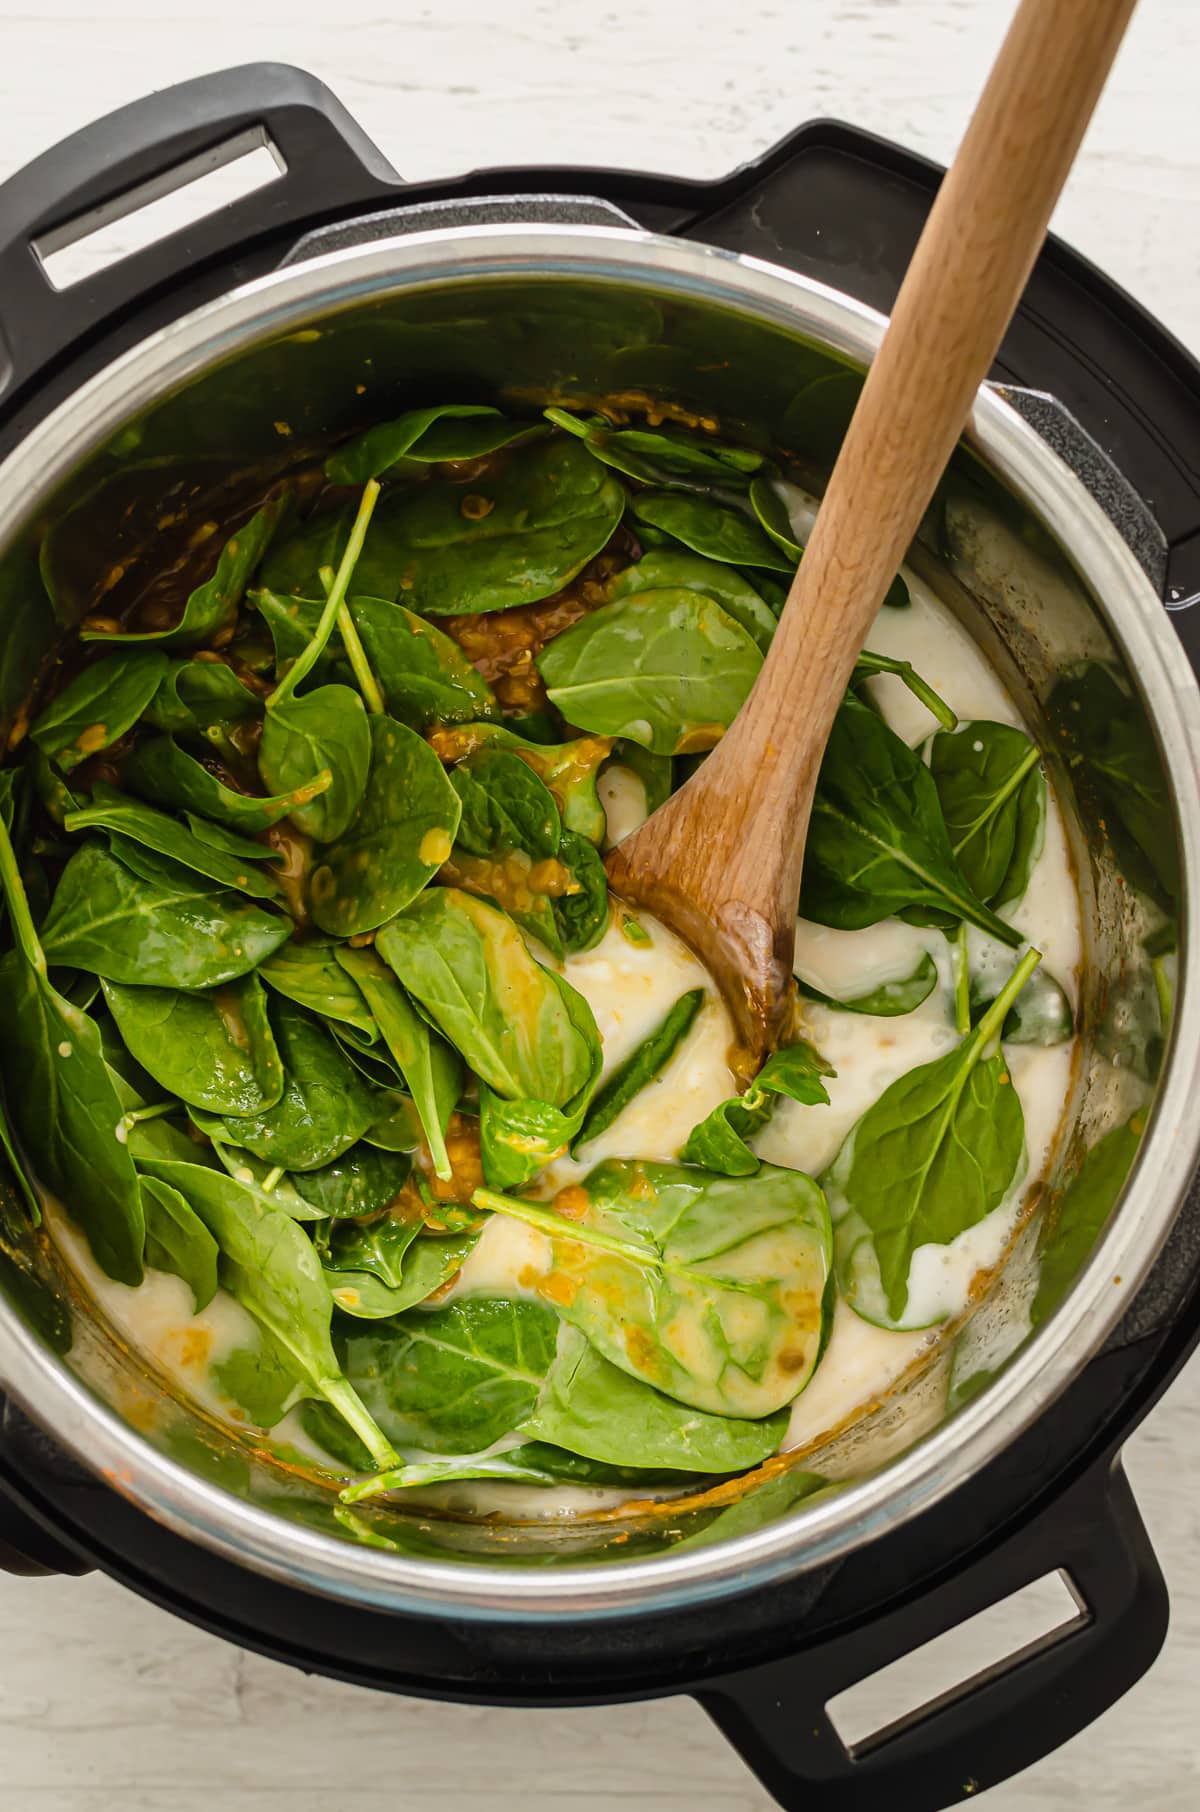 Spinach and coconut milk being stirred into an Instant Pot full of lentil curry.